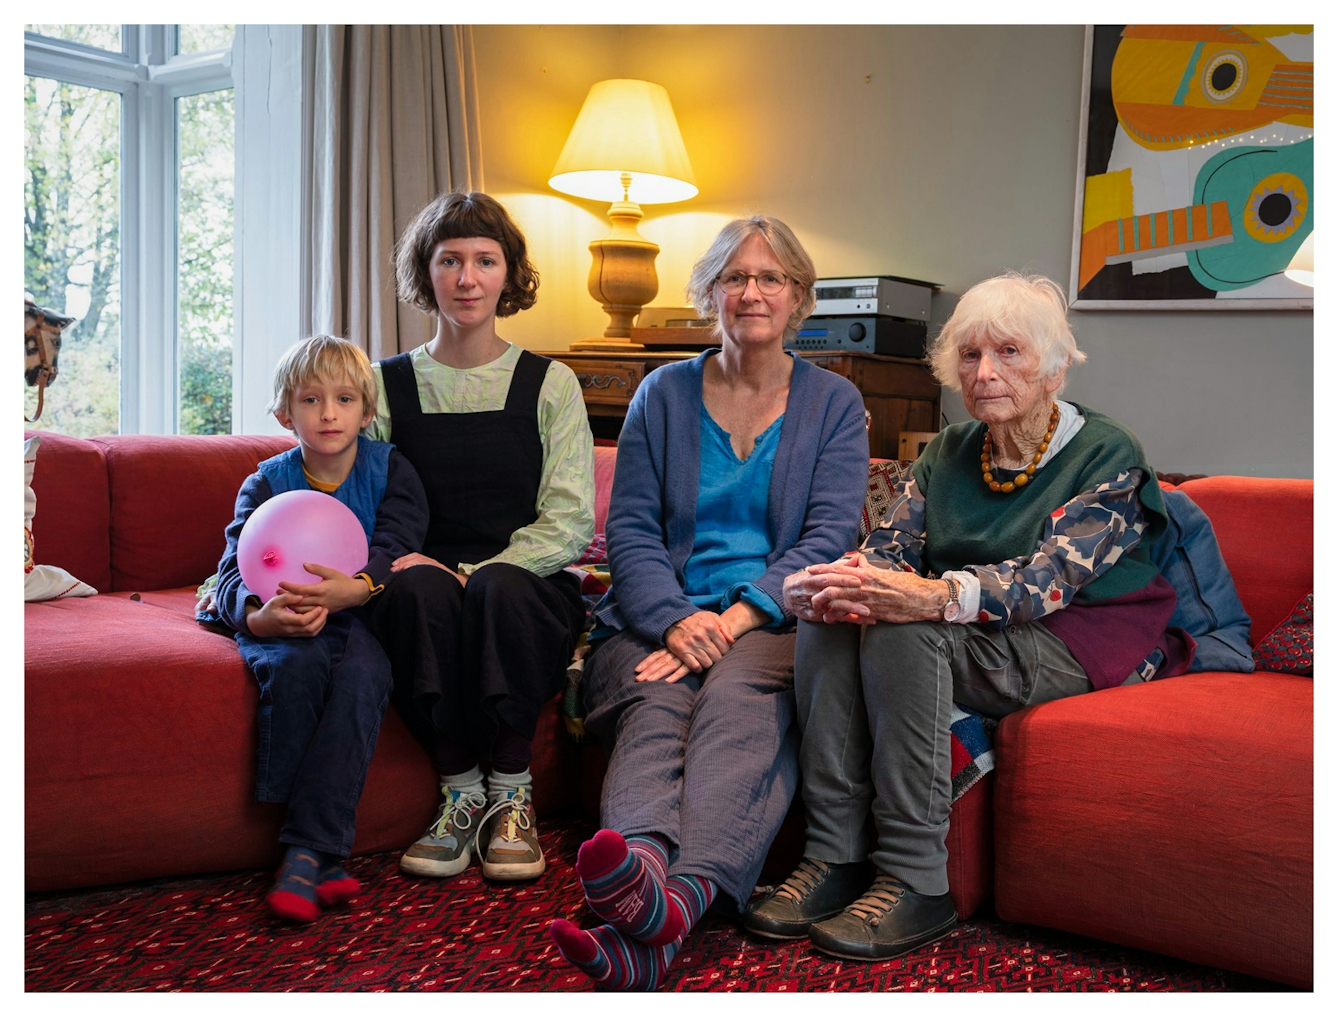 Family group photograph showing four generations of the same family. The great-grandmother sits on the right, by her side sits the grandmother. Next to her sits the granddaughter and next to her the great-grandson who is holding an inflated pink balloon. They are all seated on a long red sofa in a living room, surrounded by lamps, a sideboard and a framed picture. They all look straight into the camera.